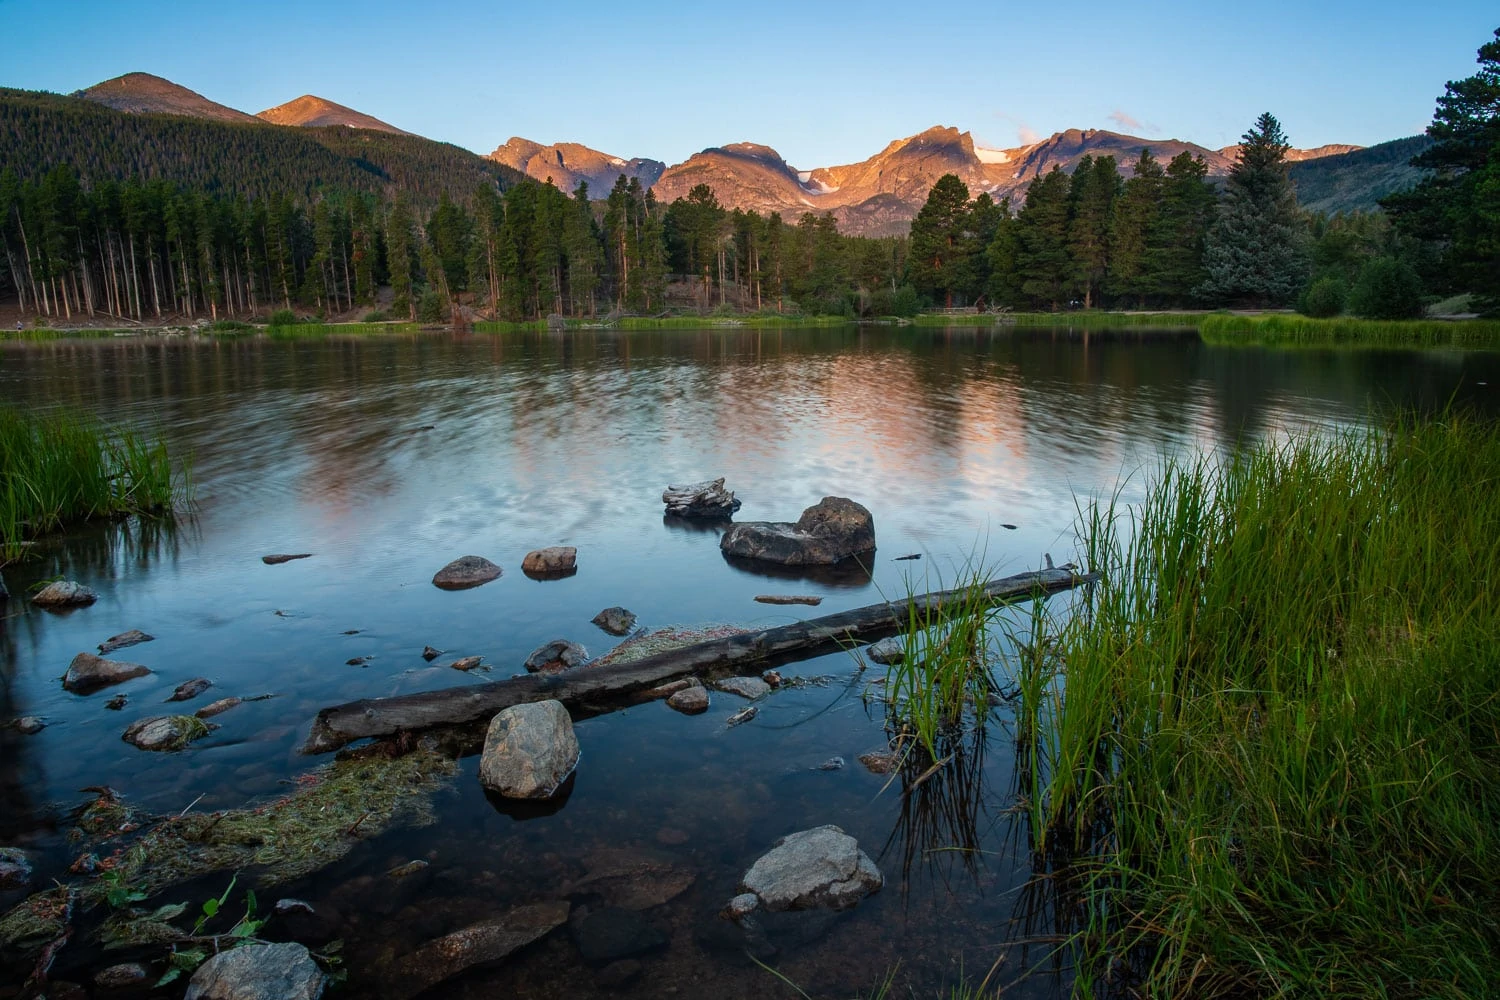 Sprague lake at sunrise in the summer by Rocky Mountain National Park photographer Lucy Schultz.